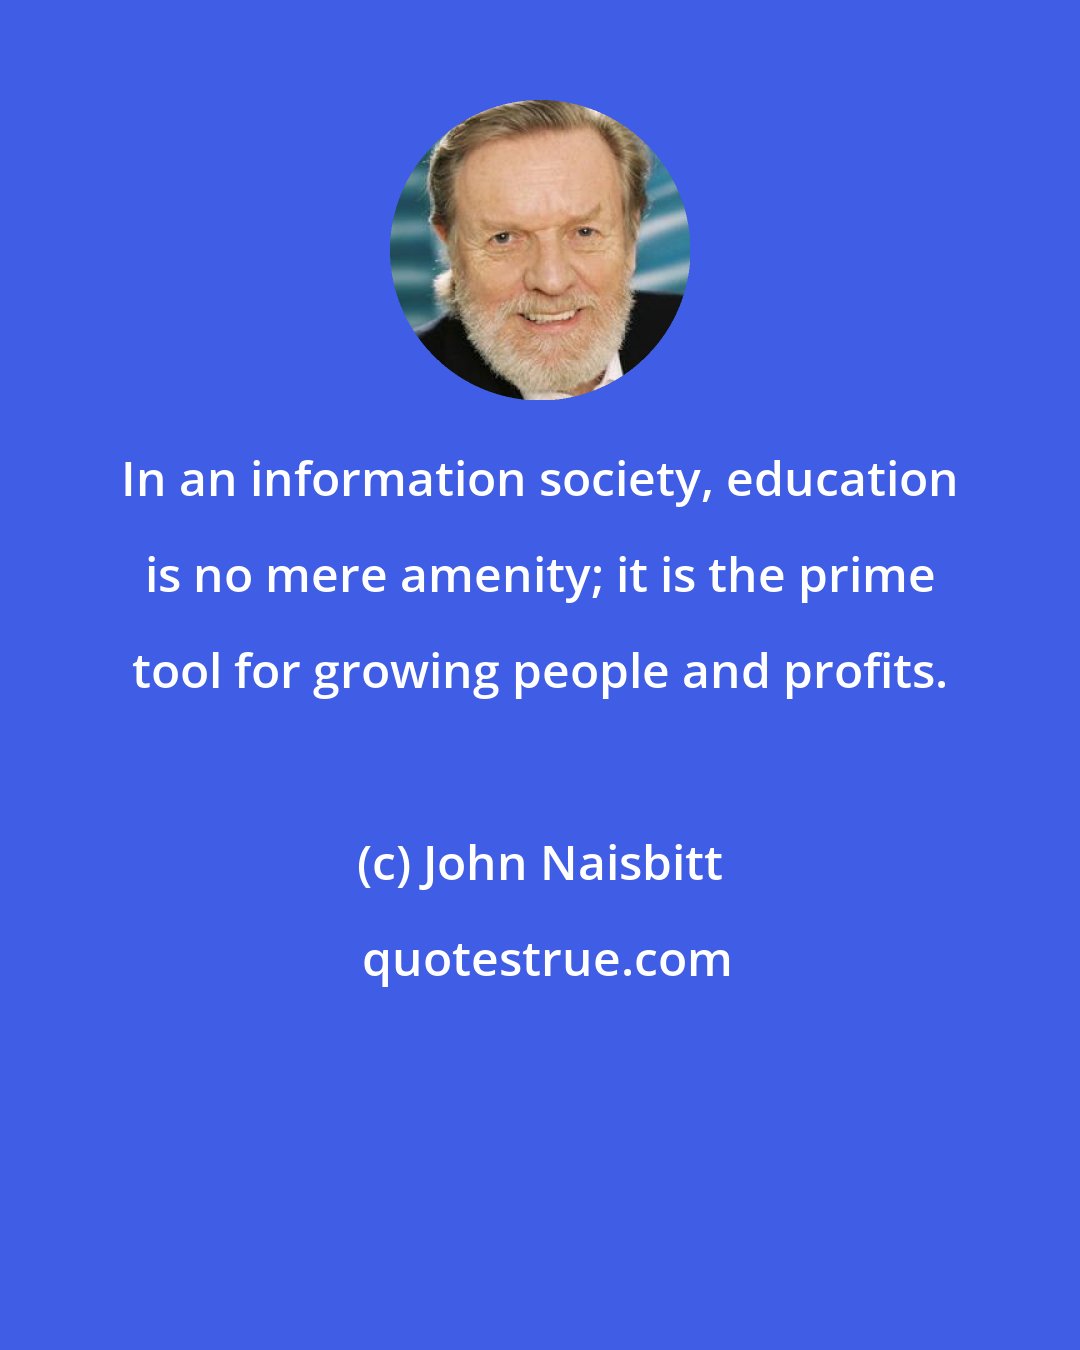 John Naisbitt: In an information society, education is no mere amenity; it is the prime tool for growing people and profits.